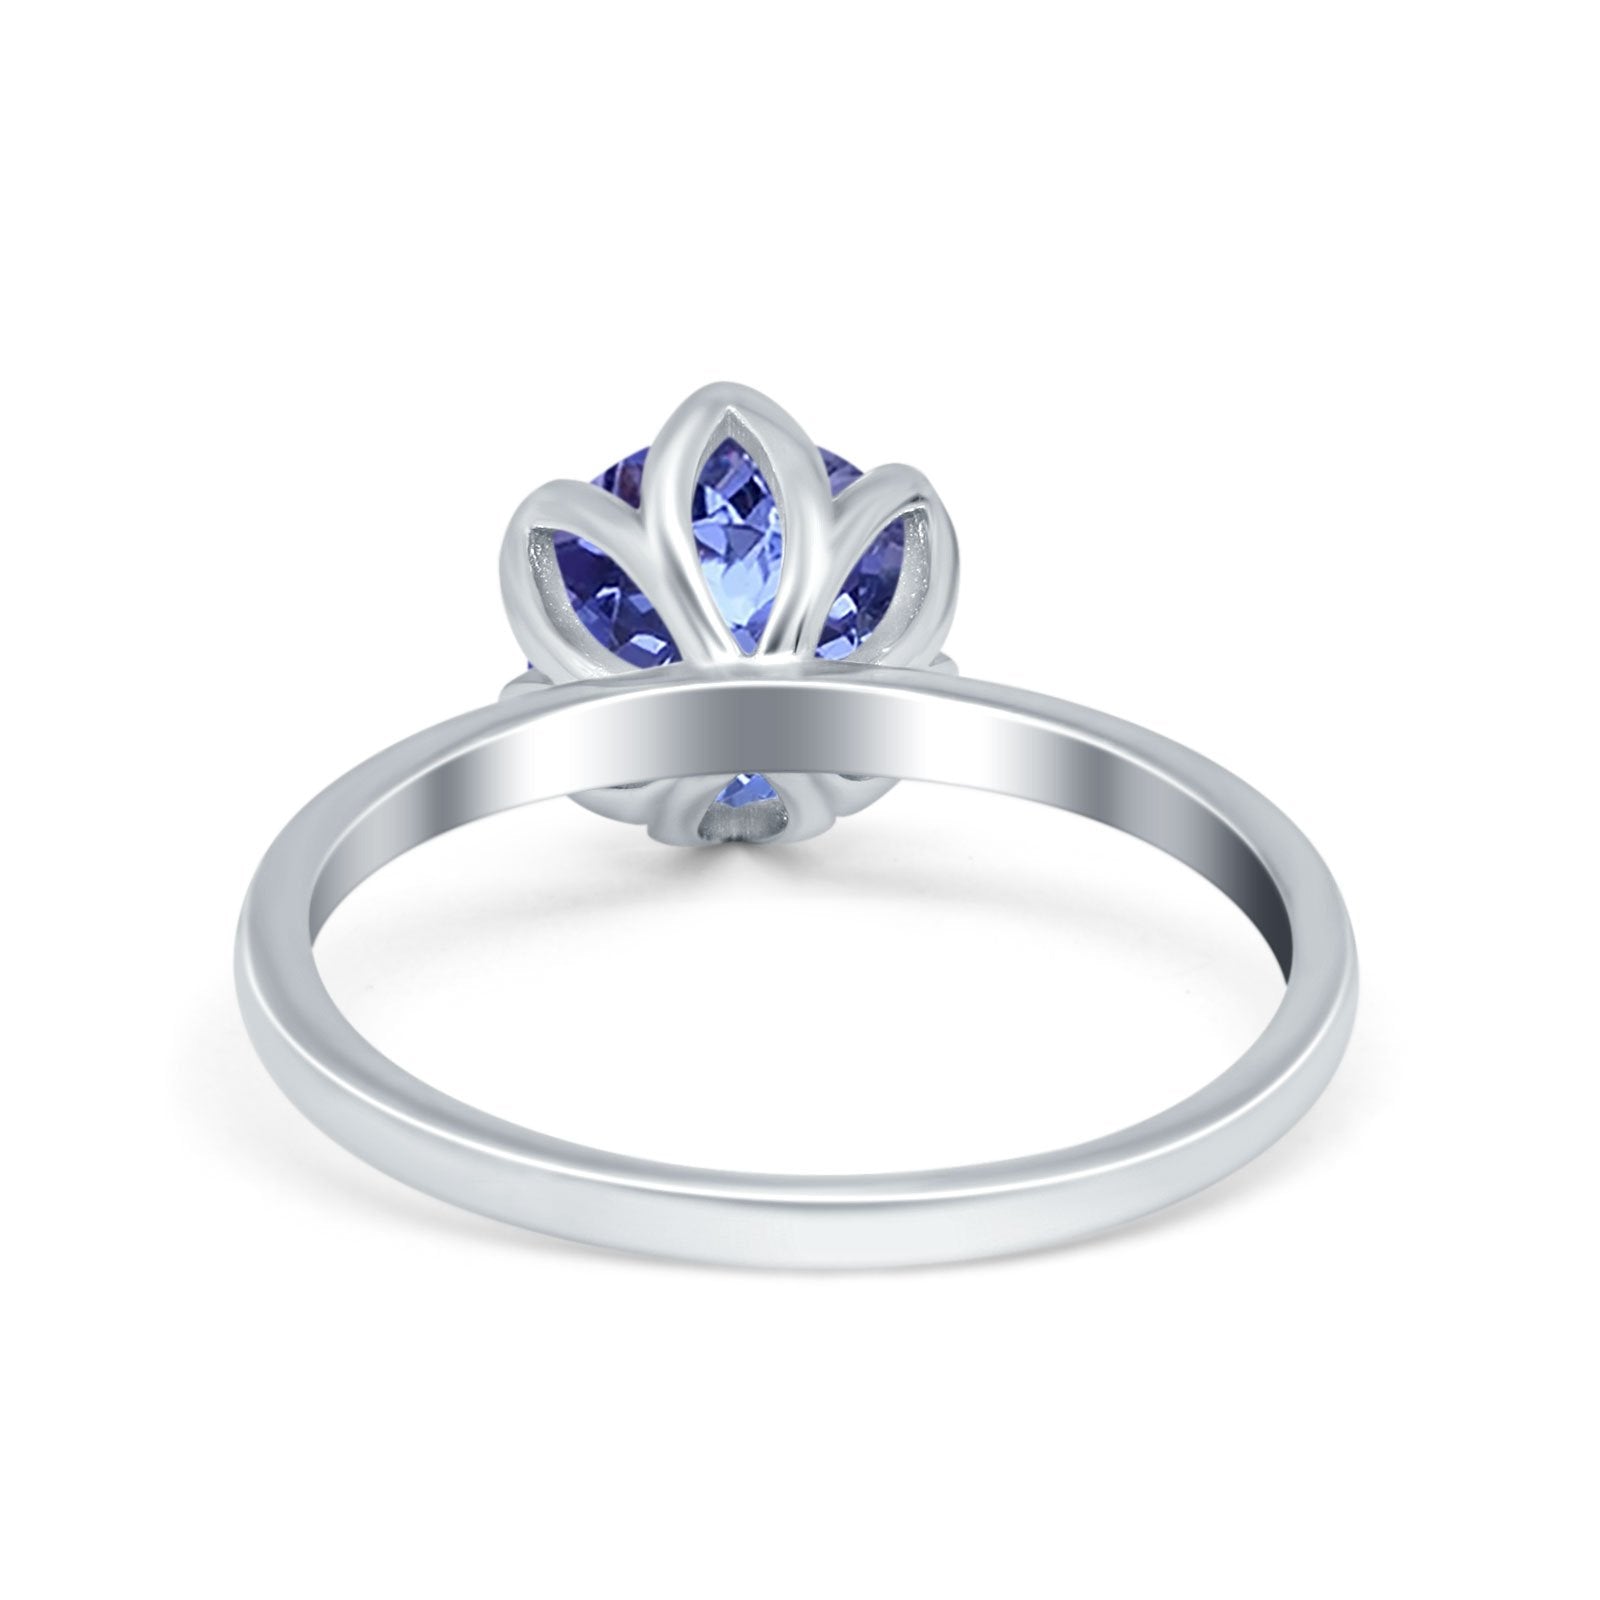 Flower Solitaire Wedding Ring Simulated Cubic Zirconia 925 Sterling Silver